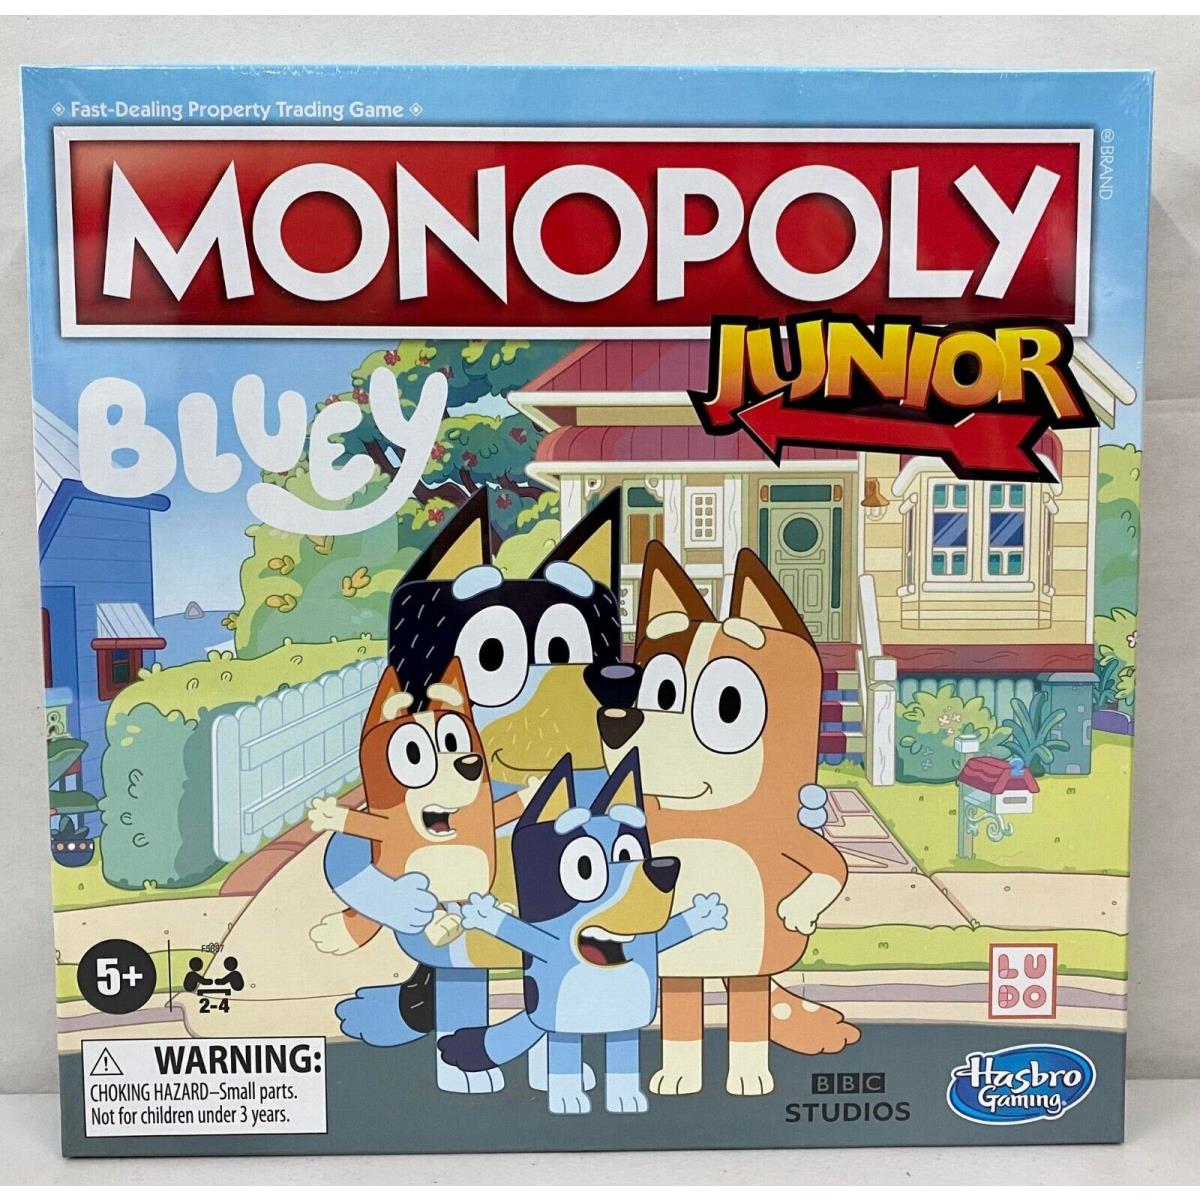 Hasbro Monopoly Junior: Bluey Edition Board Game For Kids - IN H